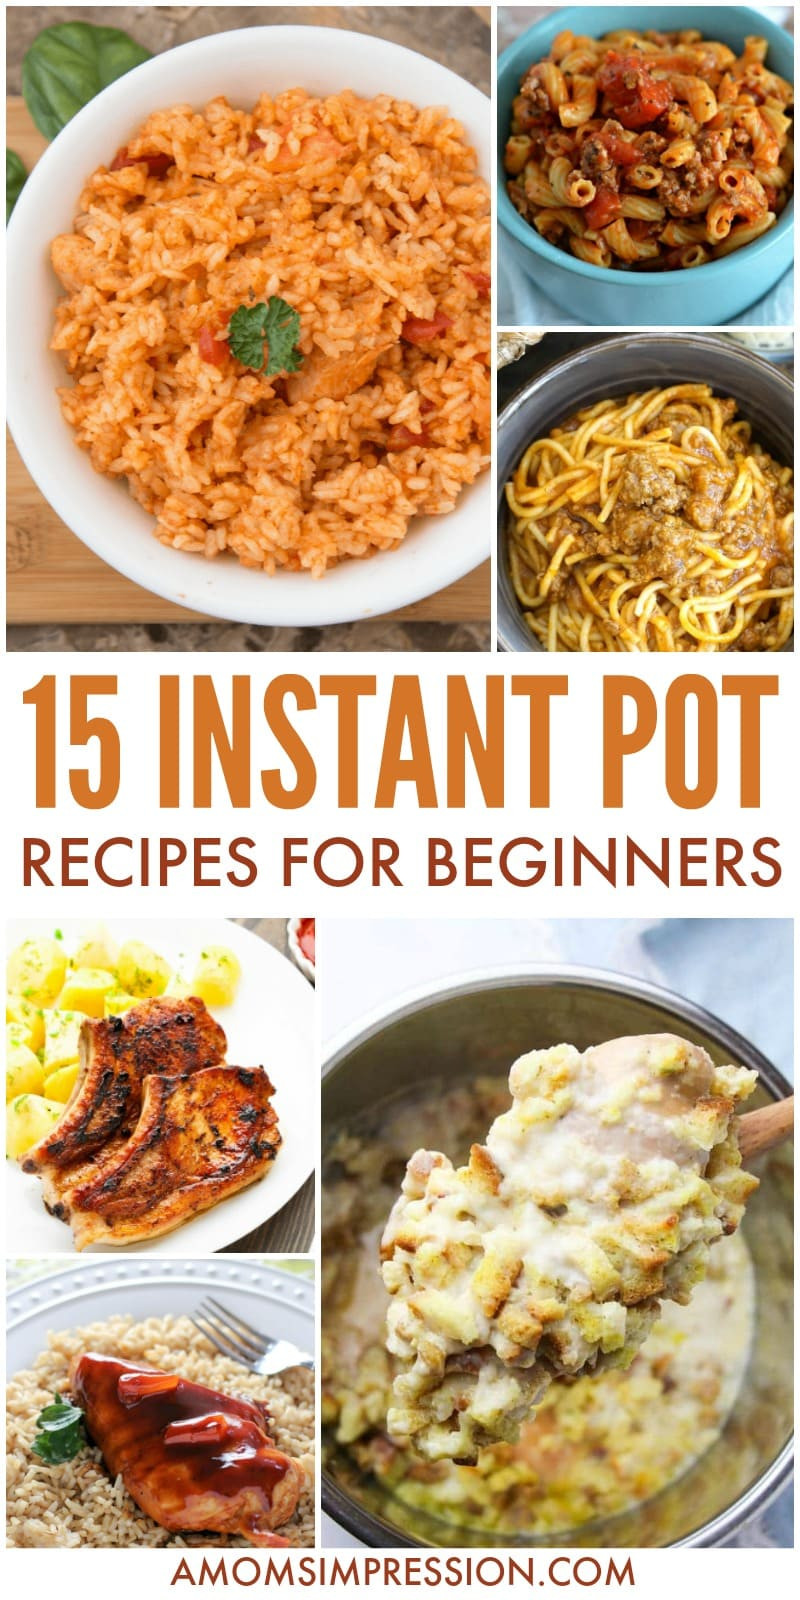 Easy Instant Pot Recipes
 15 Easy Instant Pot Recipes for Beginners A Mom s Impression